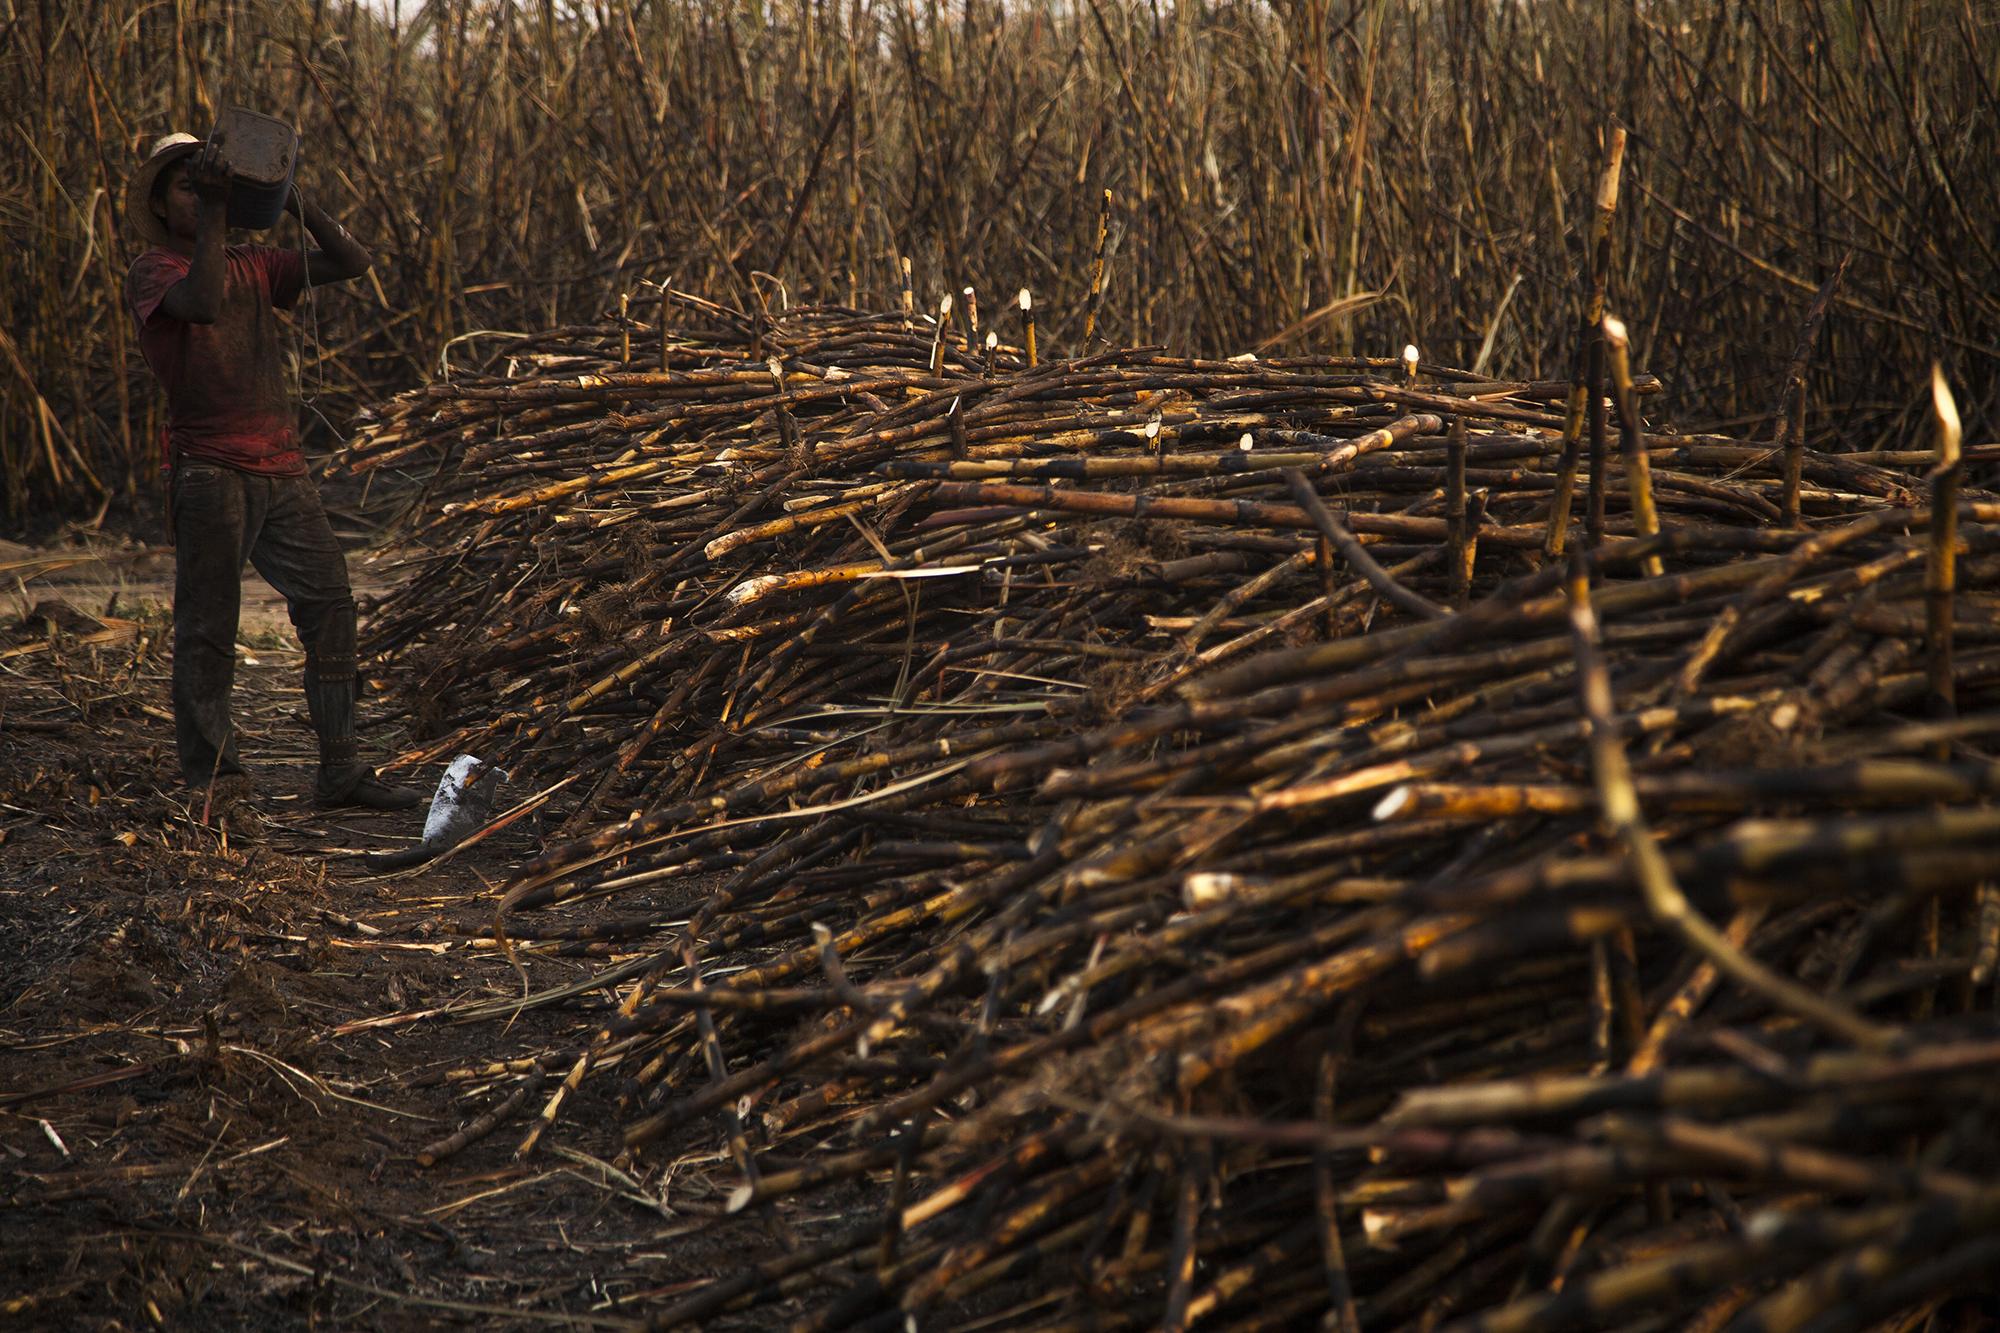 Martín Quinilla,22, takes a break during the sugarcane harvest day on the Madre Tierra property in the Escuintla department. Guatemala is internationally considered to be a 